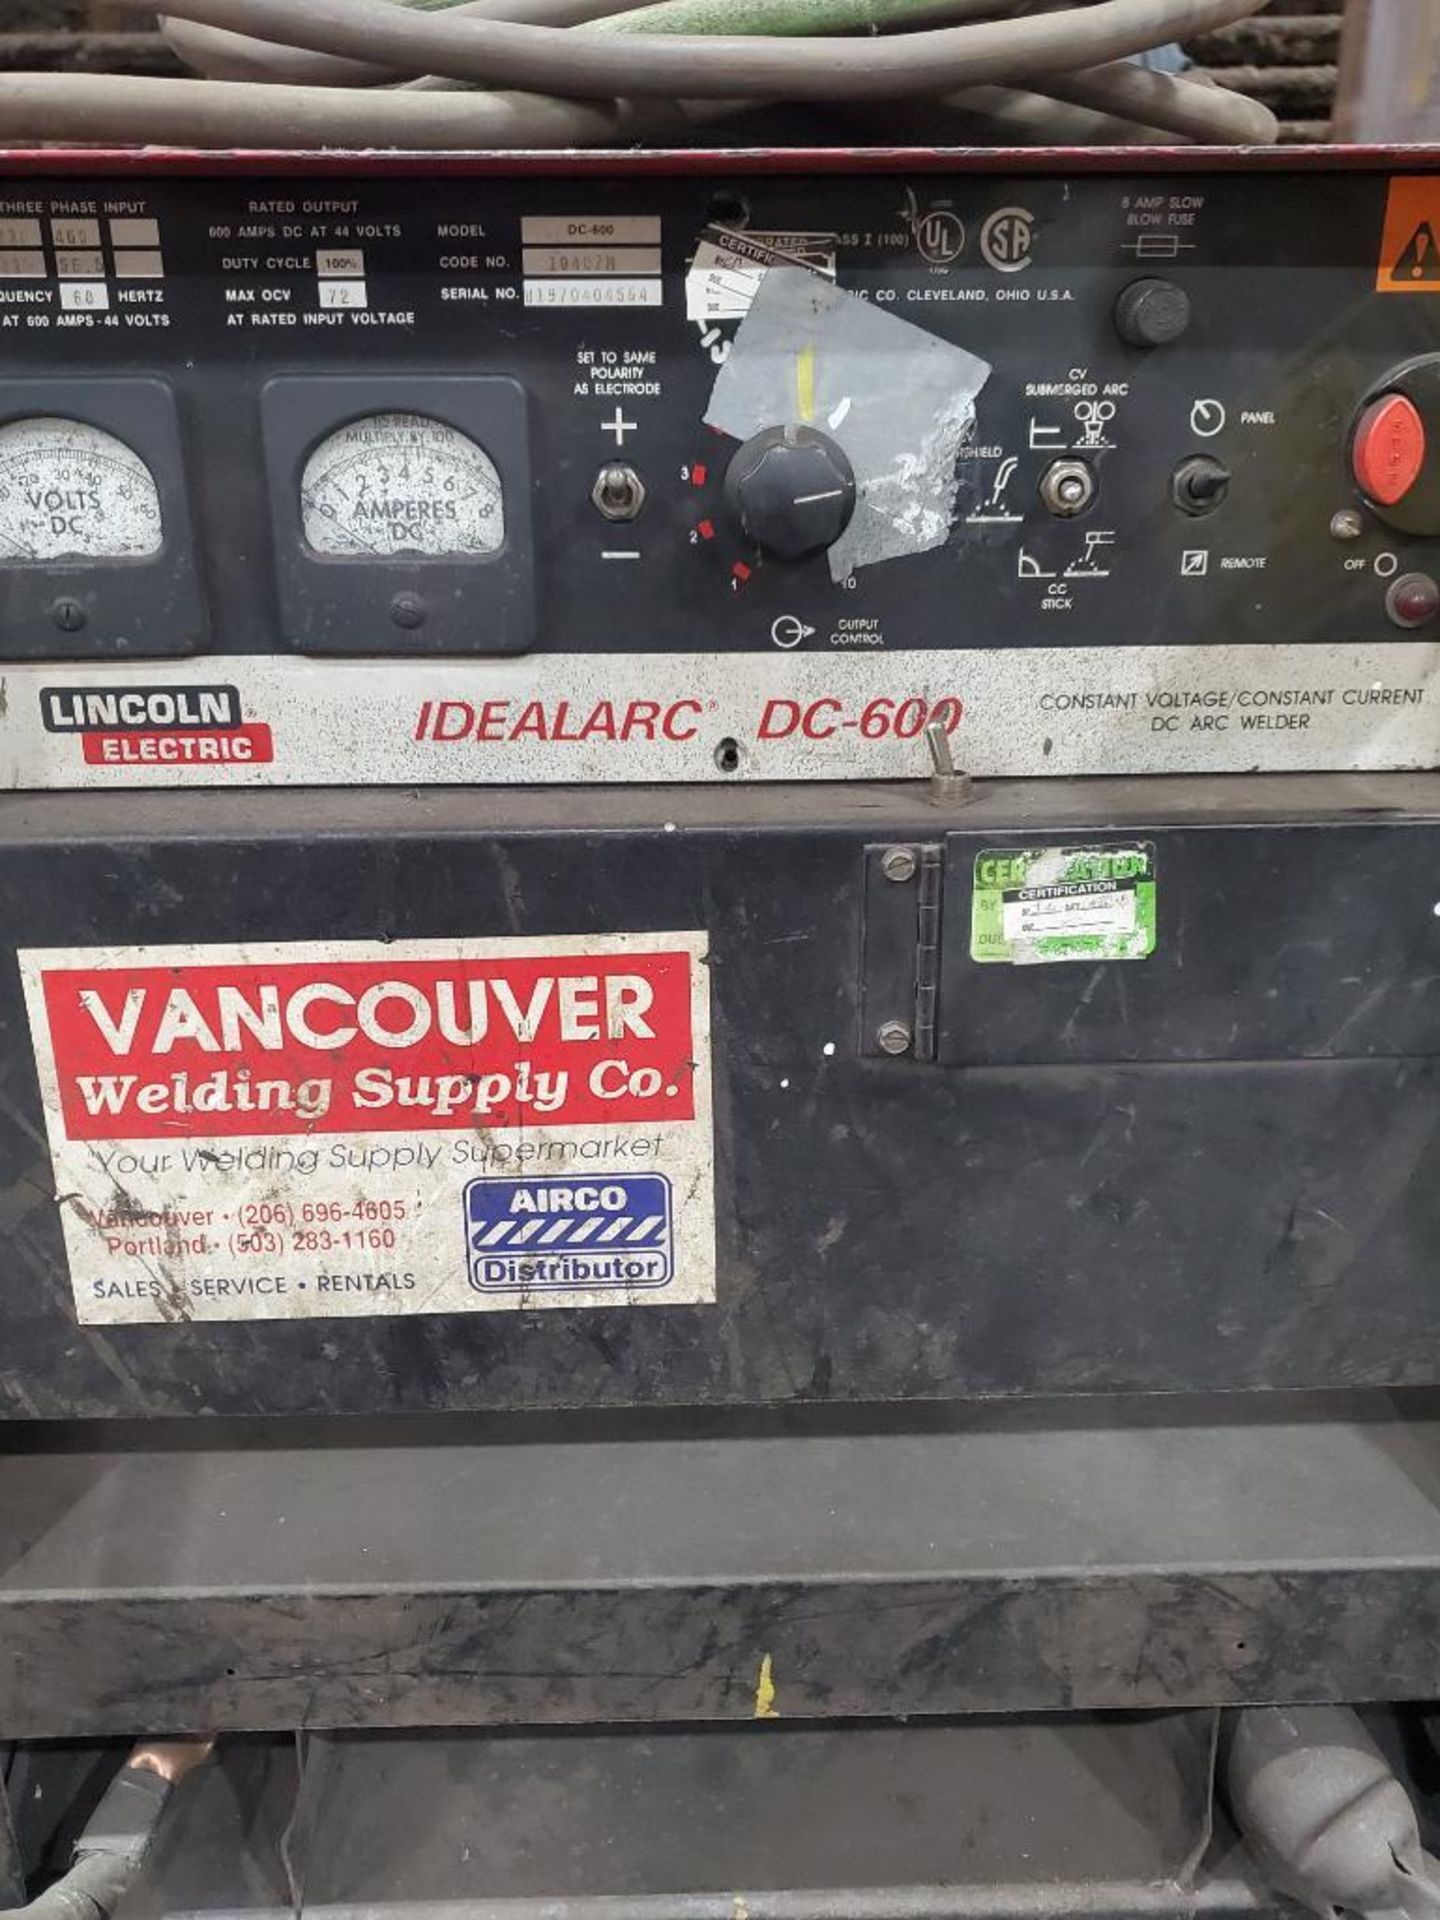 LINCOLN ELECTRIC IDEALARC DC-600 WELDER SN.U1970404564 230-460V WITH LN-7 WIRE FEED SN.U1961005864 - Image 5 of 8